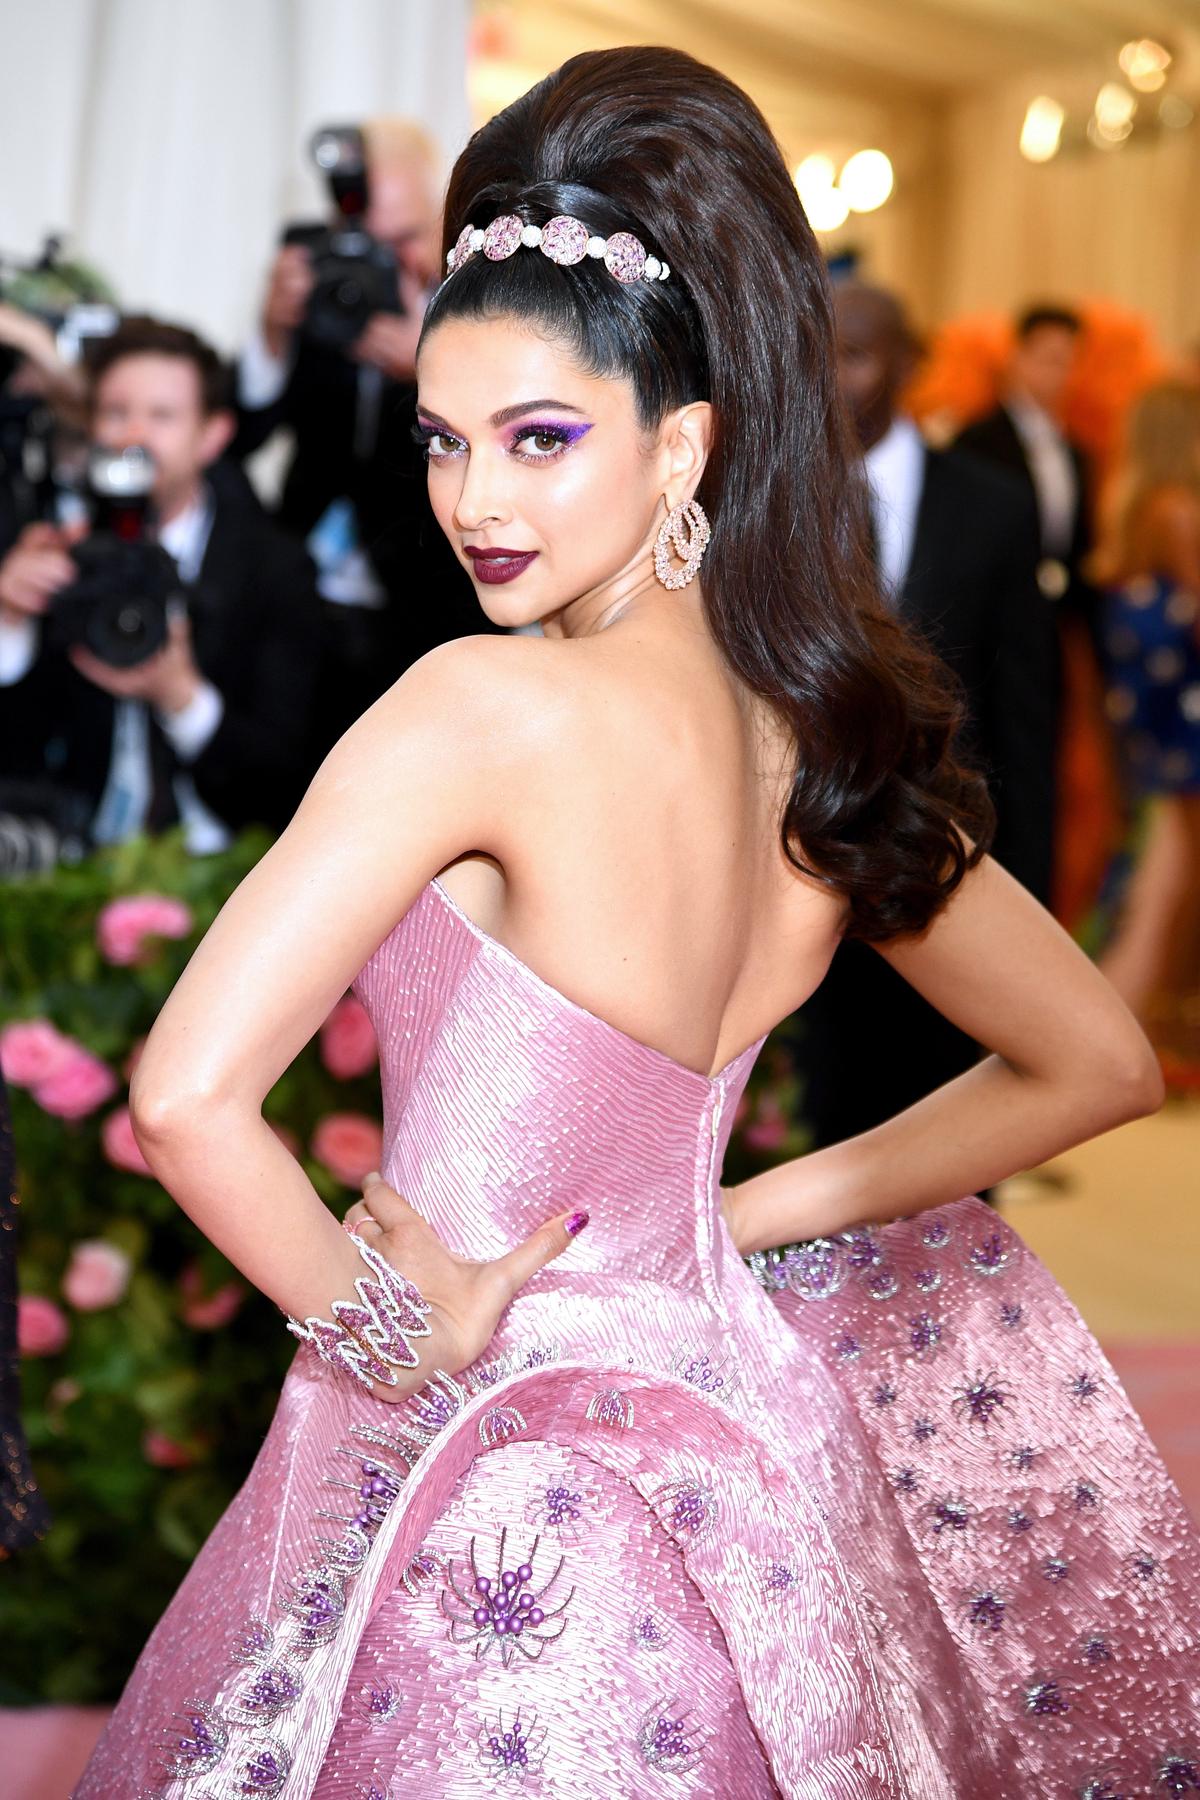  Gabriel styled the Bollywood actress Deepika Padukone's hair for the 2019 Met Gala. (Dimitrios Kambouris/Getty Images for The Met Museum/Vogue)